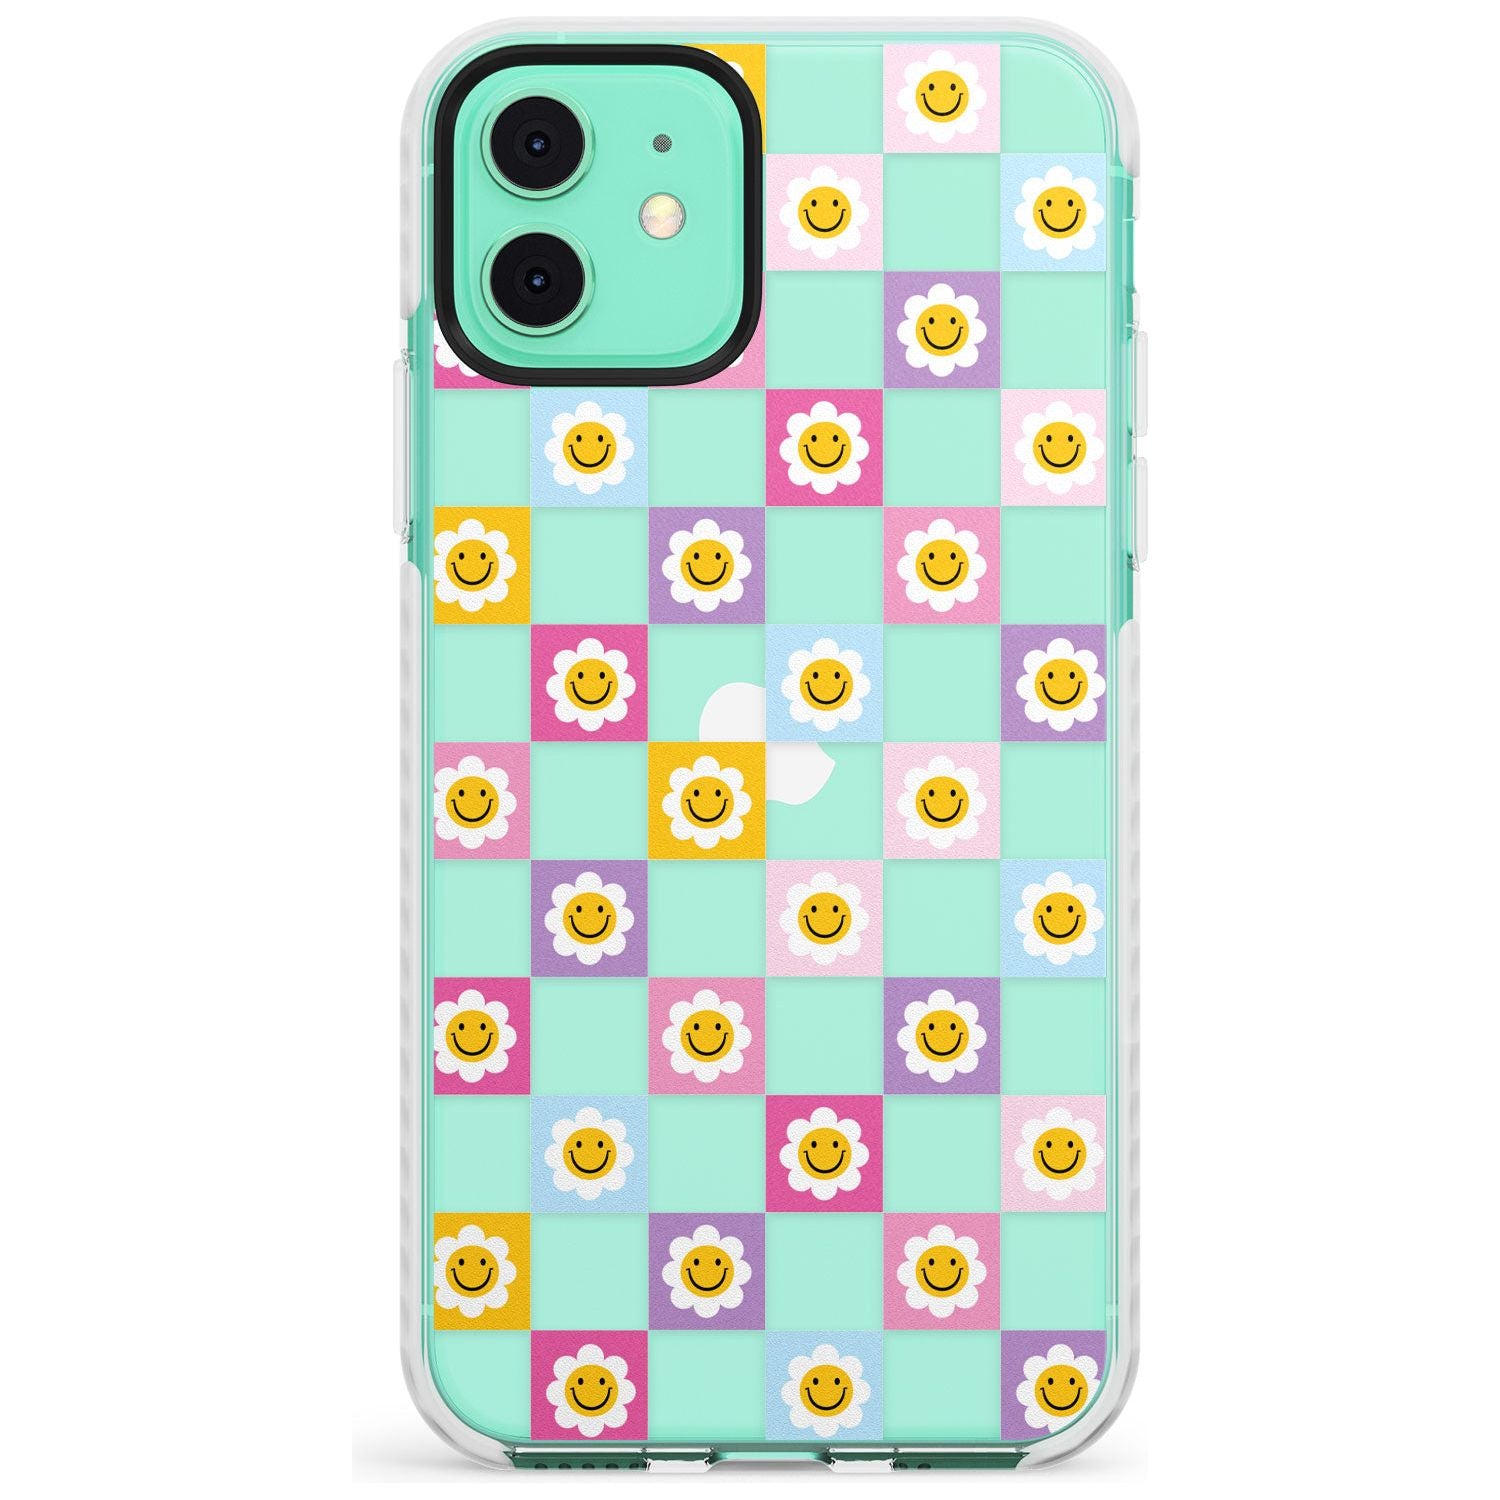 Daisy Squares Pattern Impact Phone Case for iPhone 11